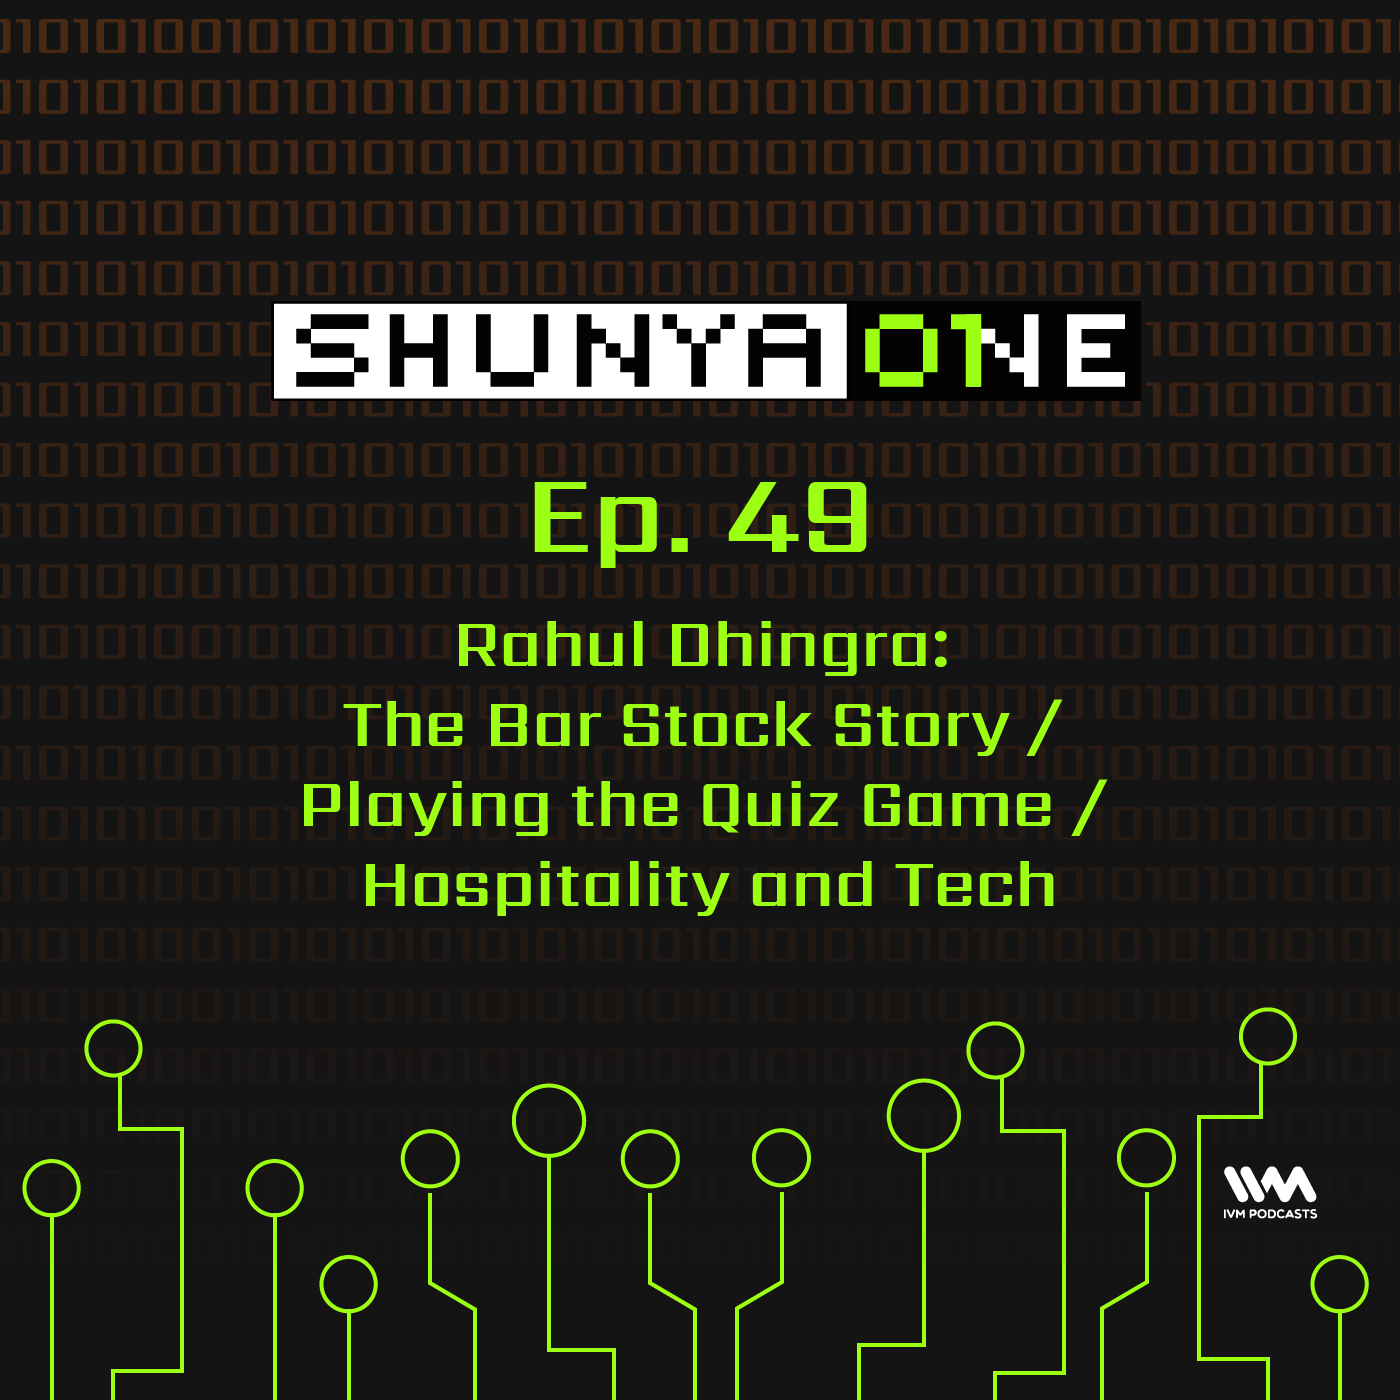 Feat. Rahul Dhingra: The Bar Stock Story / Playing the Quiz Game / Hospitality and Tech